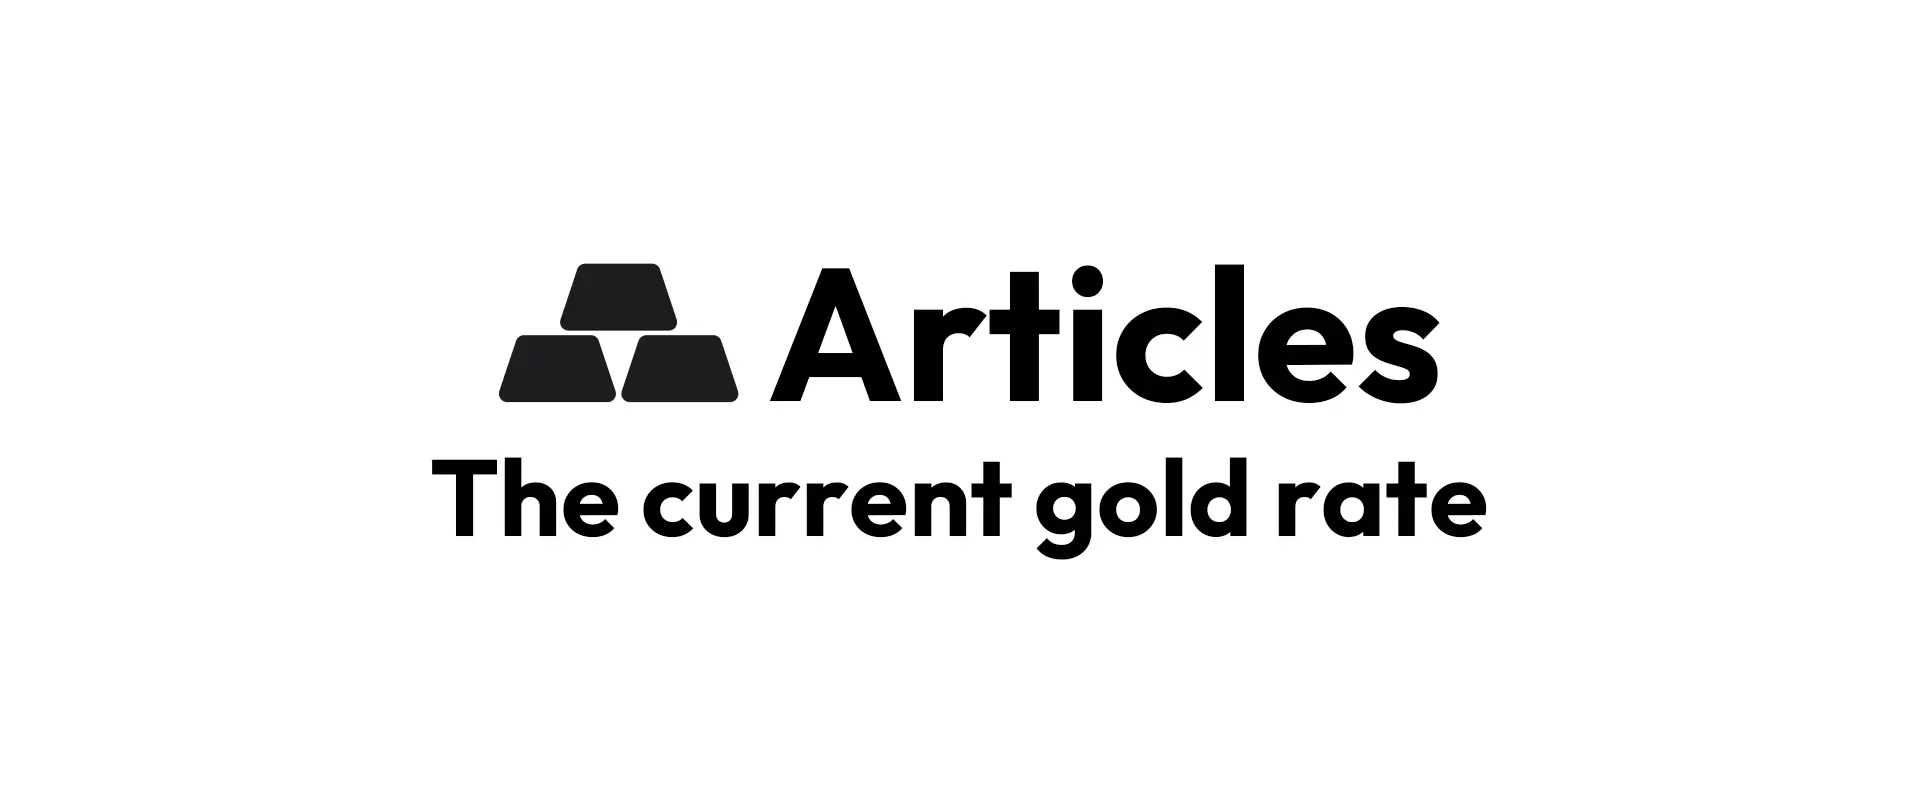 knowing the current gold rate